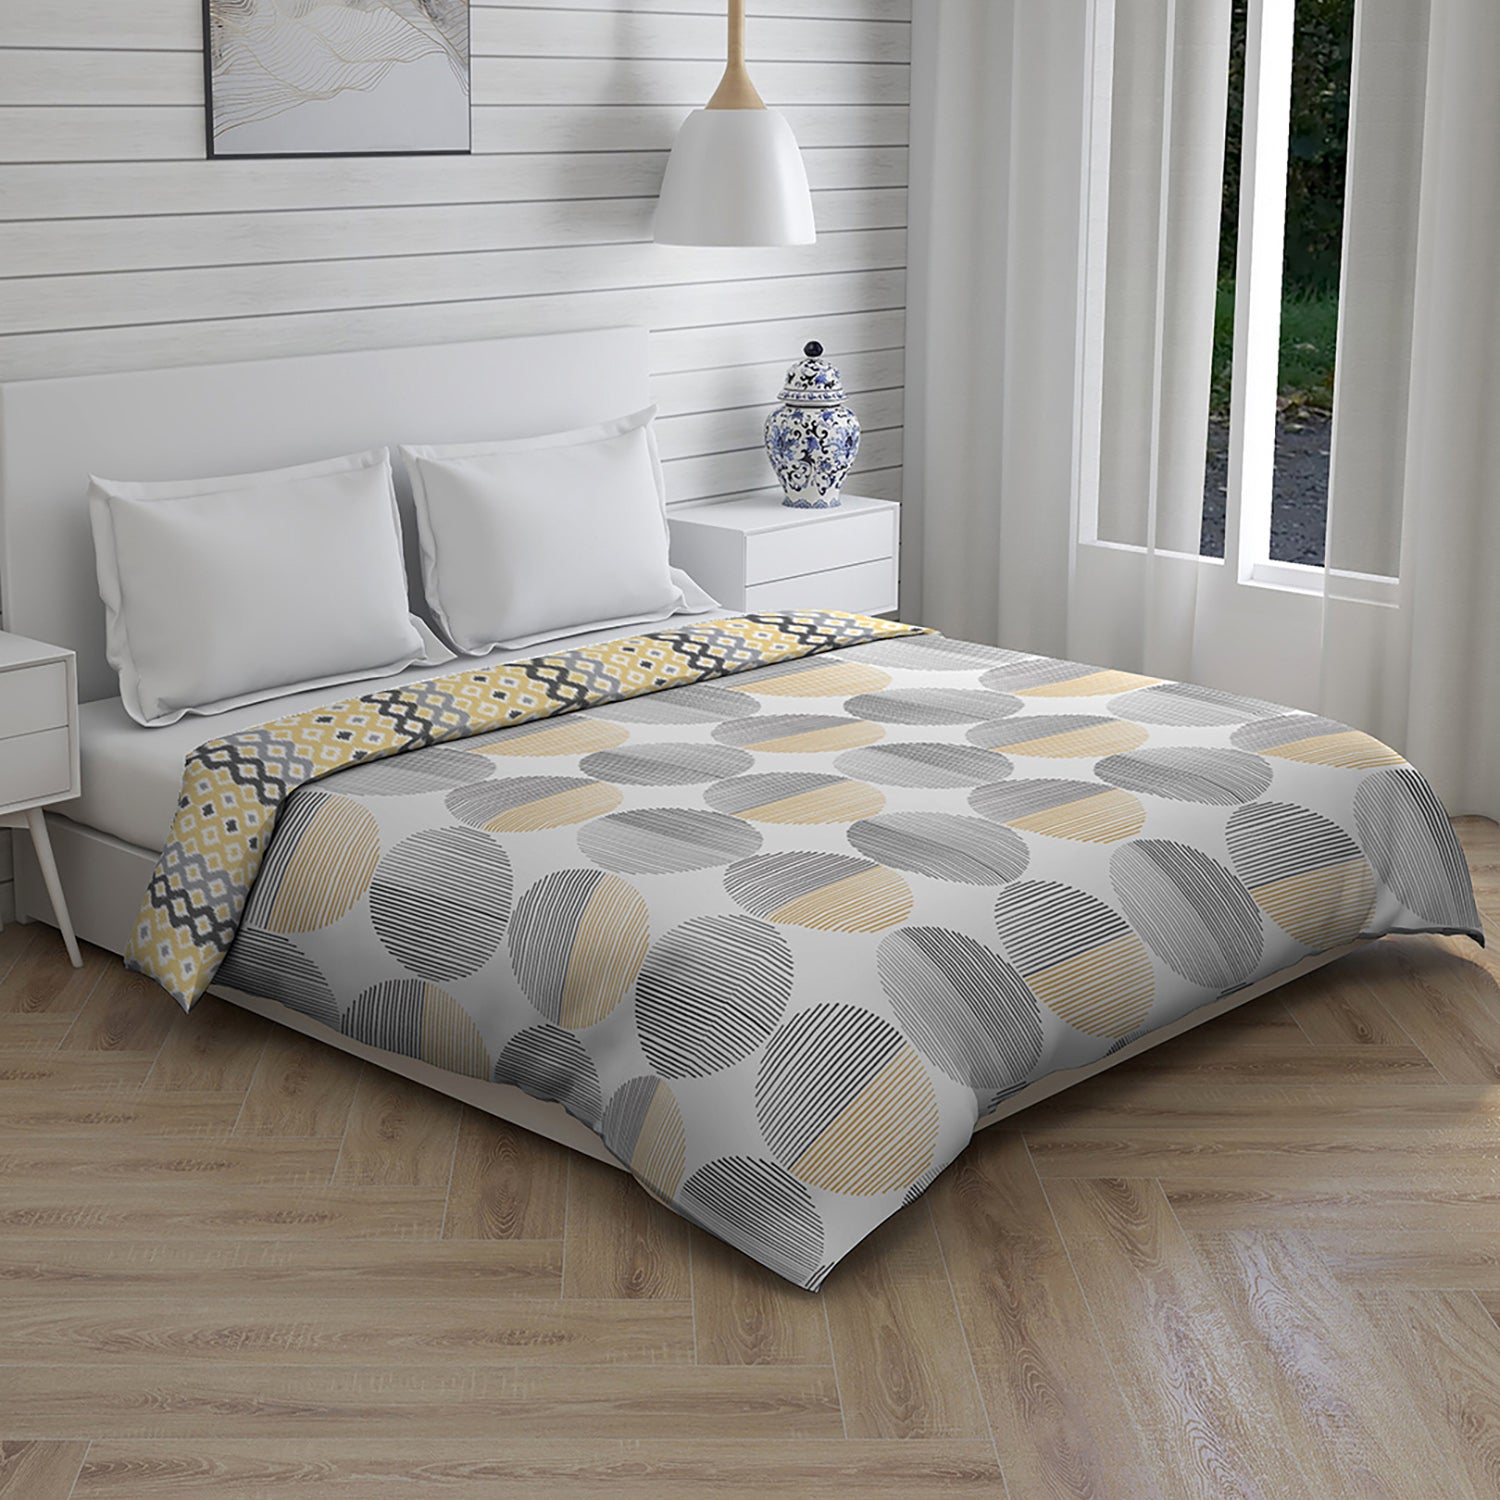 Boutique Living 144 TC Layers Printed Double Comforter